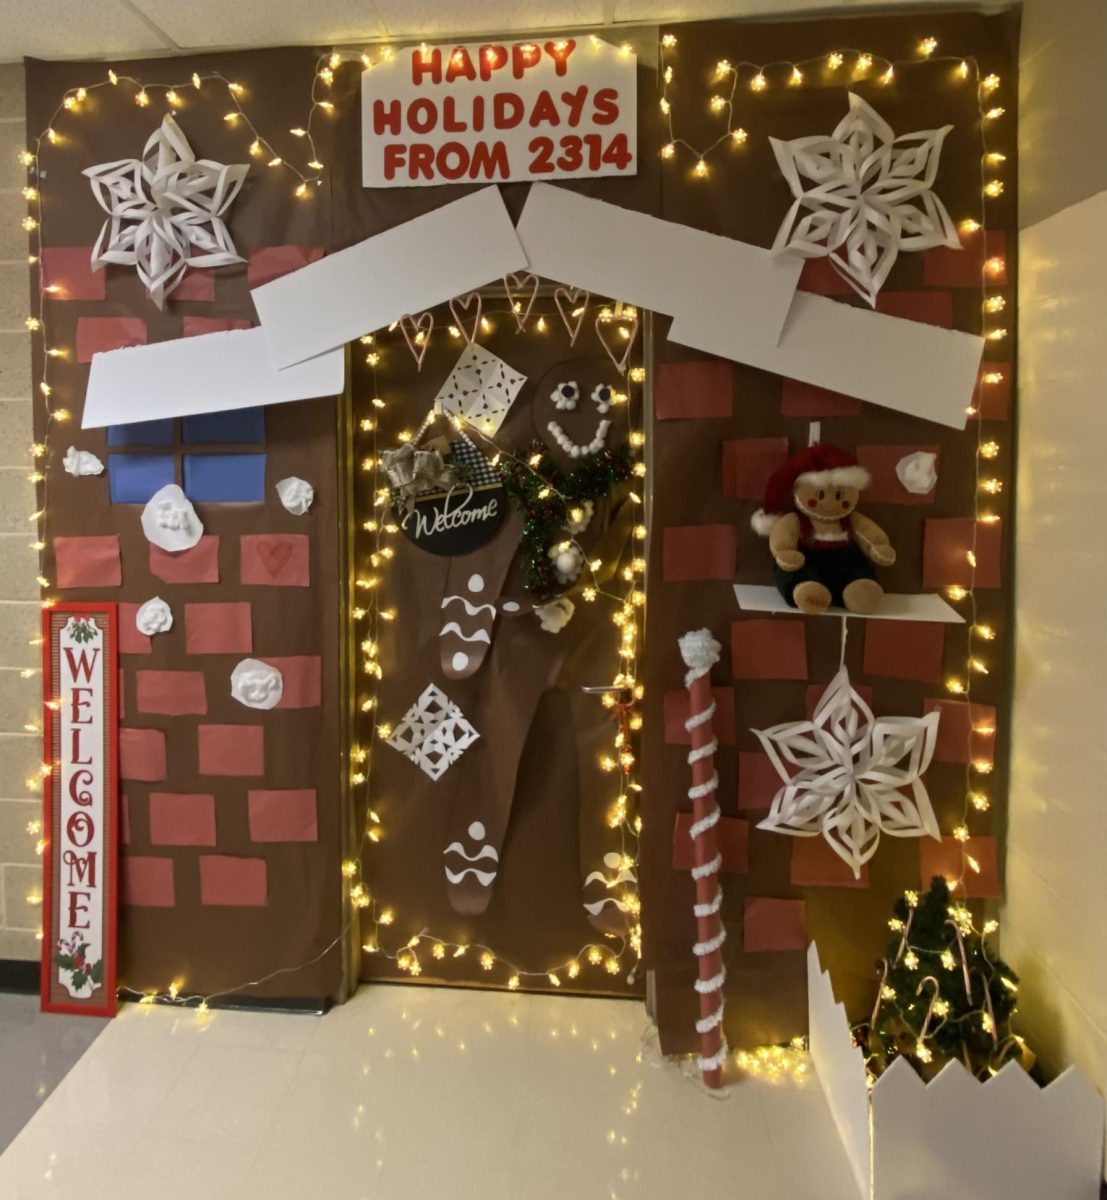 First-place winner, Mrs. Coughenour in room 2314 includes a large gingerbread man surrounded by lights on her door. Photo taken by Mrs. Coughenour.